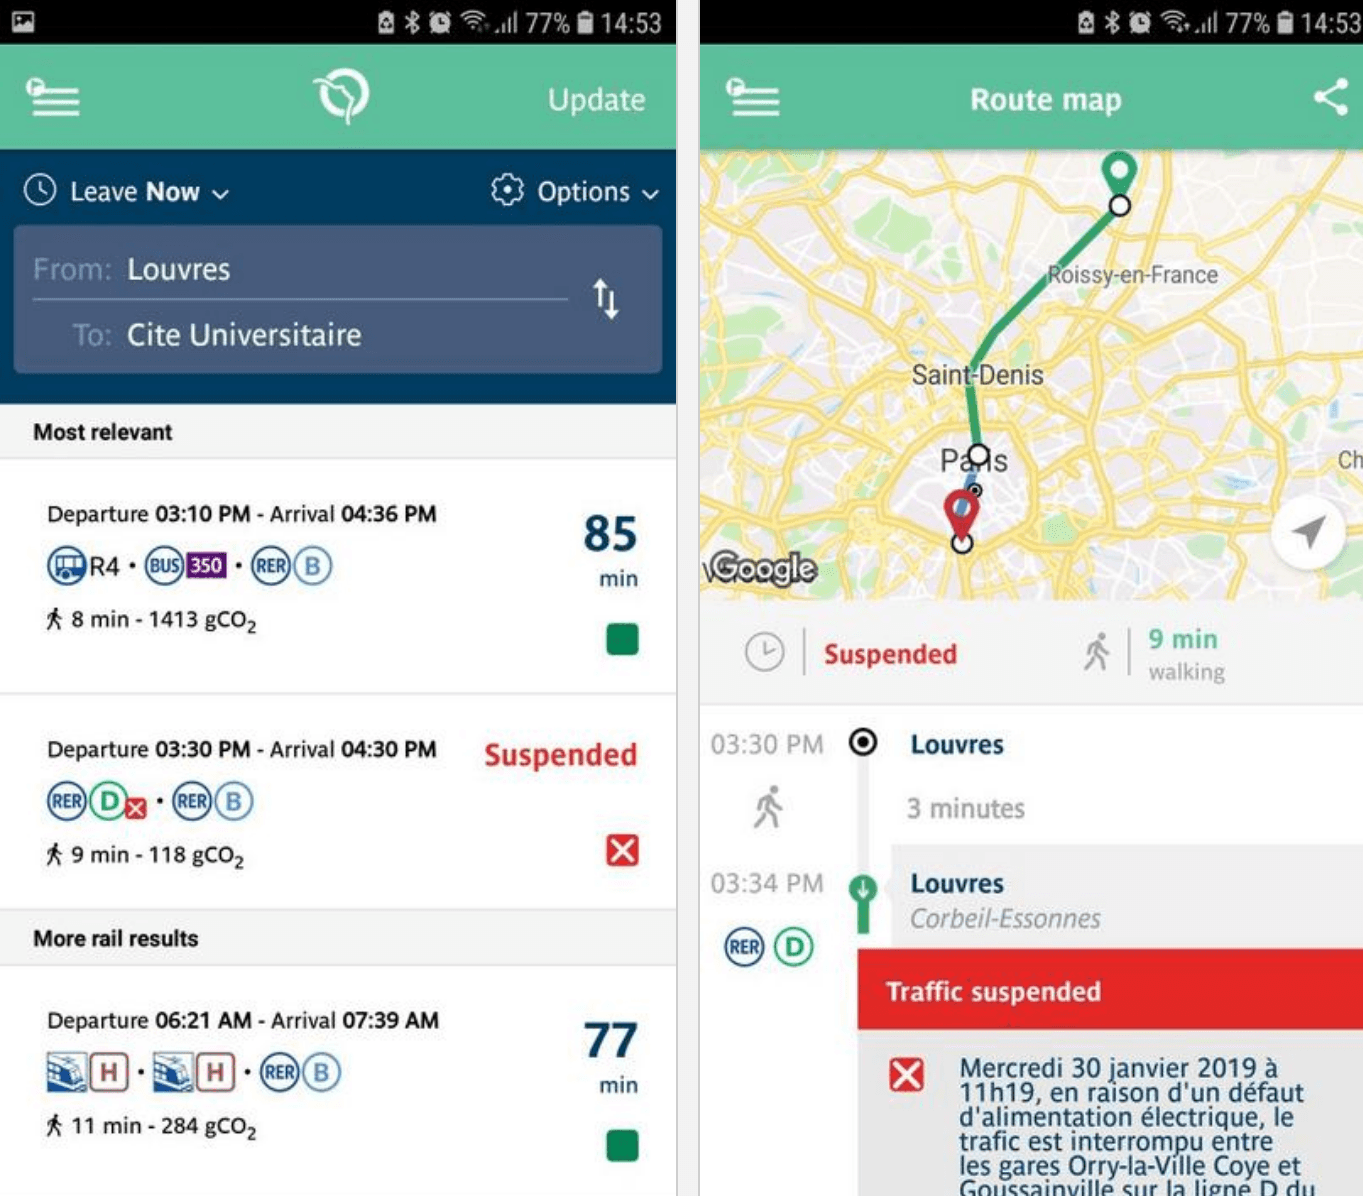 RATP map with road situation